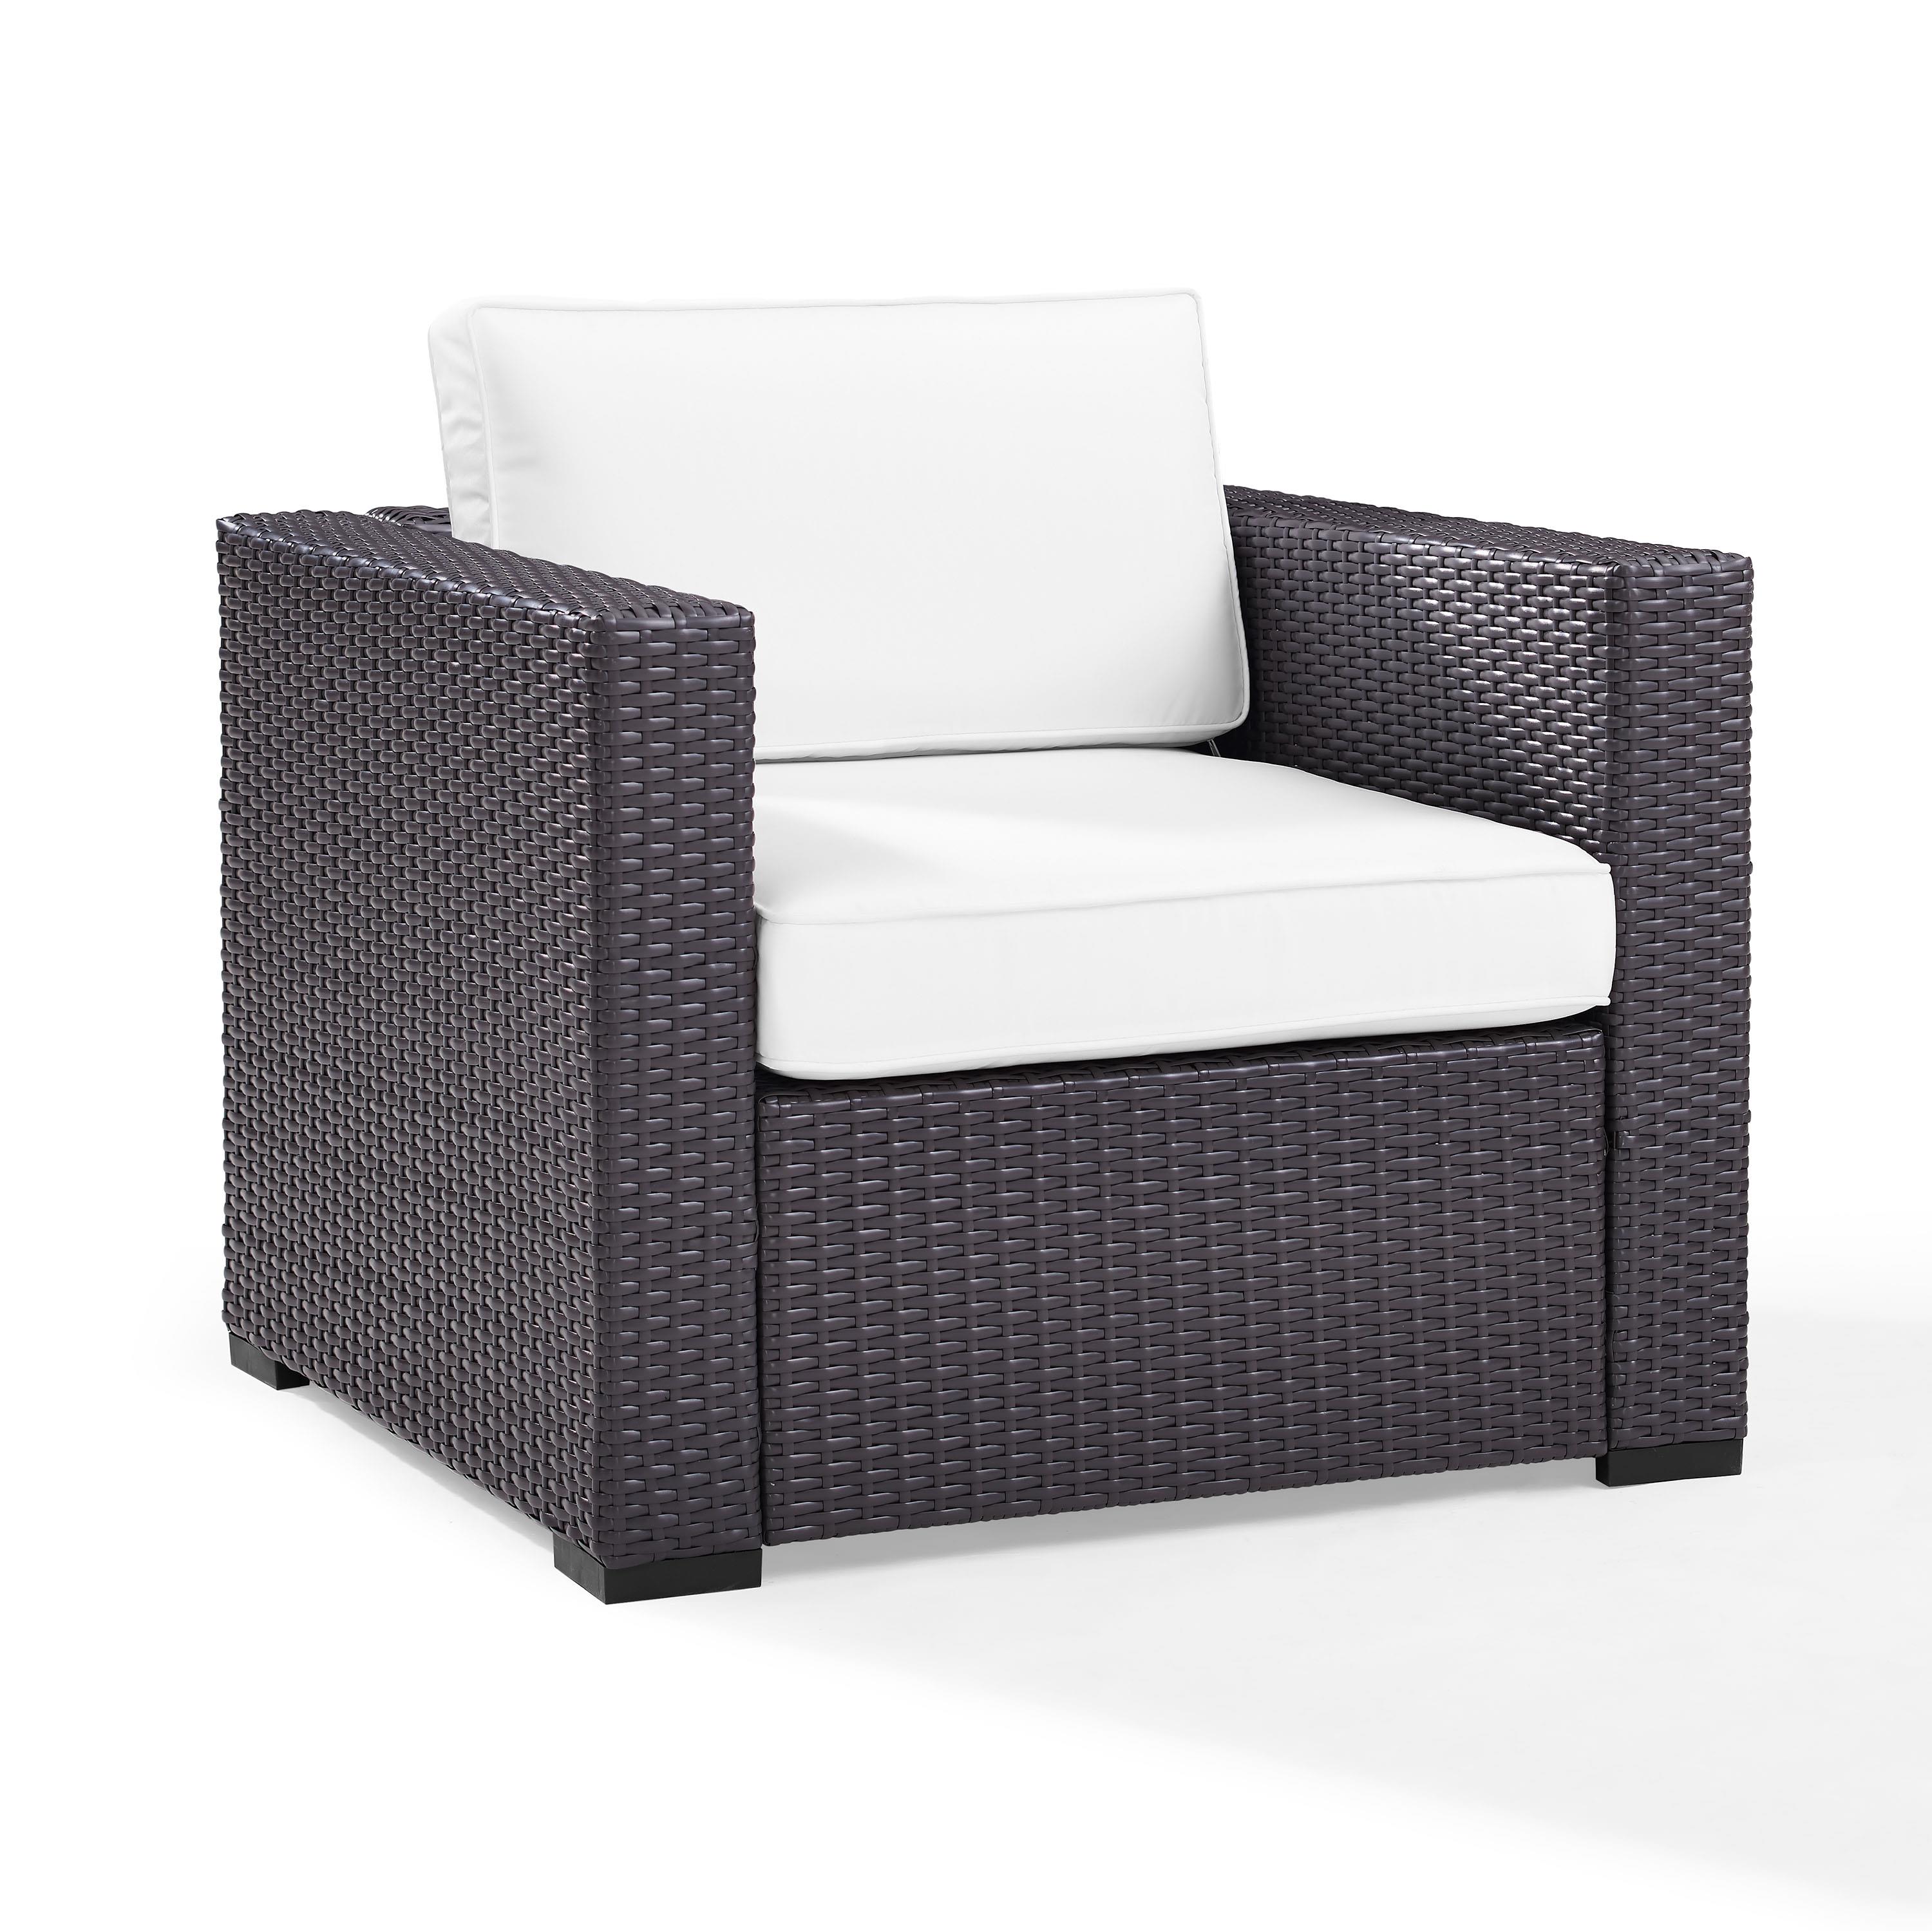 Biscayne Armchair With White Cushions - image 2 of 6